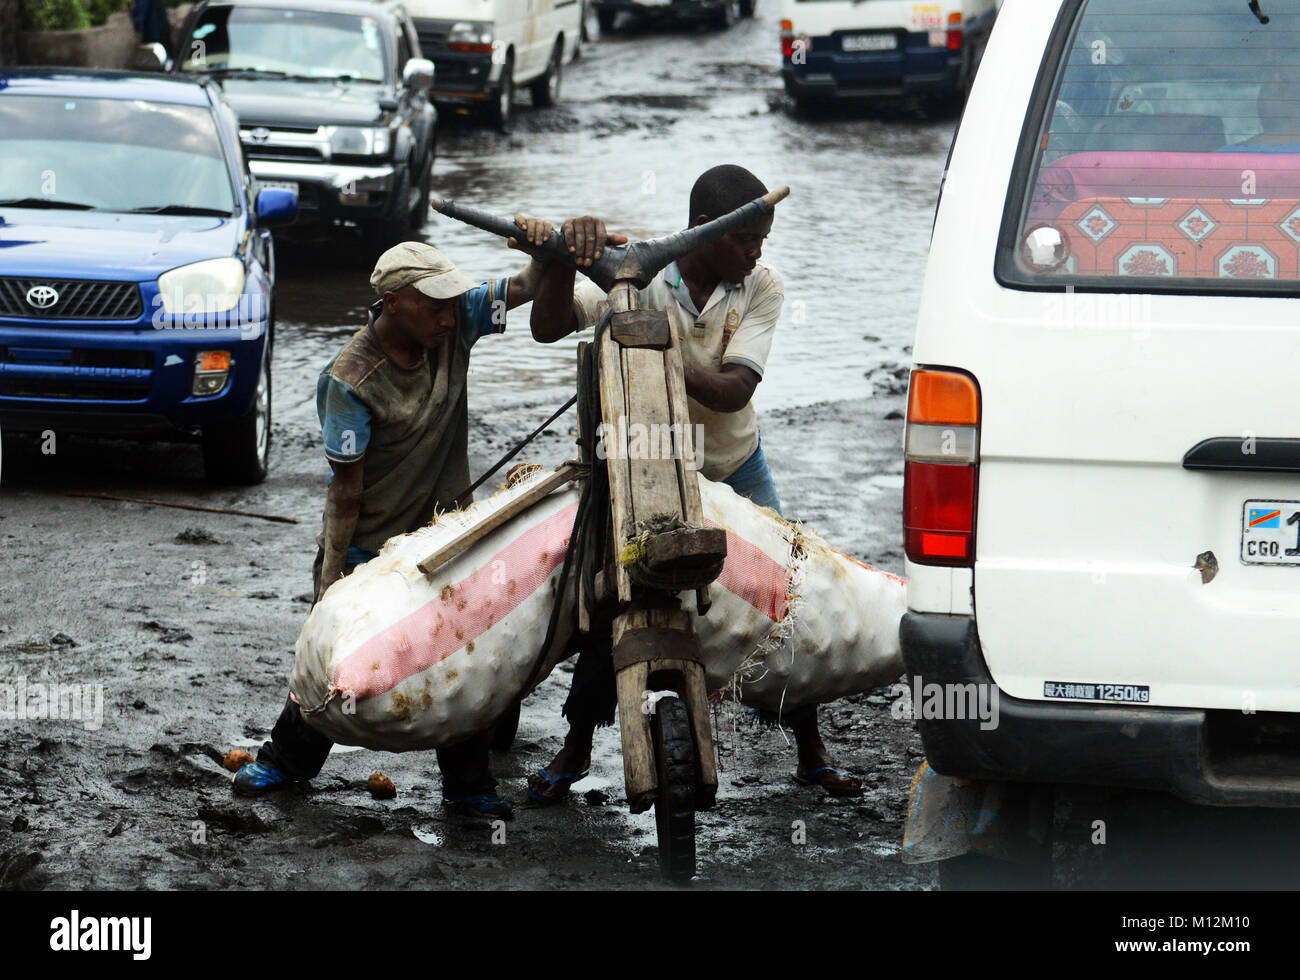 Chukudu is a traditional wooden bike transporting goods in Goma and Eastern Congo. Stock Photo